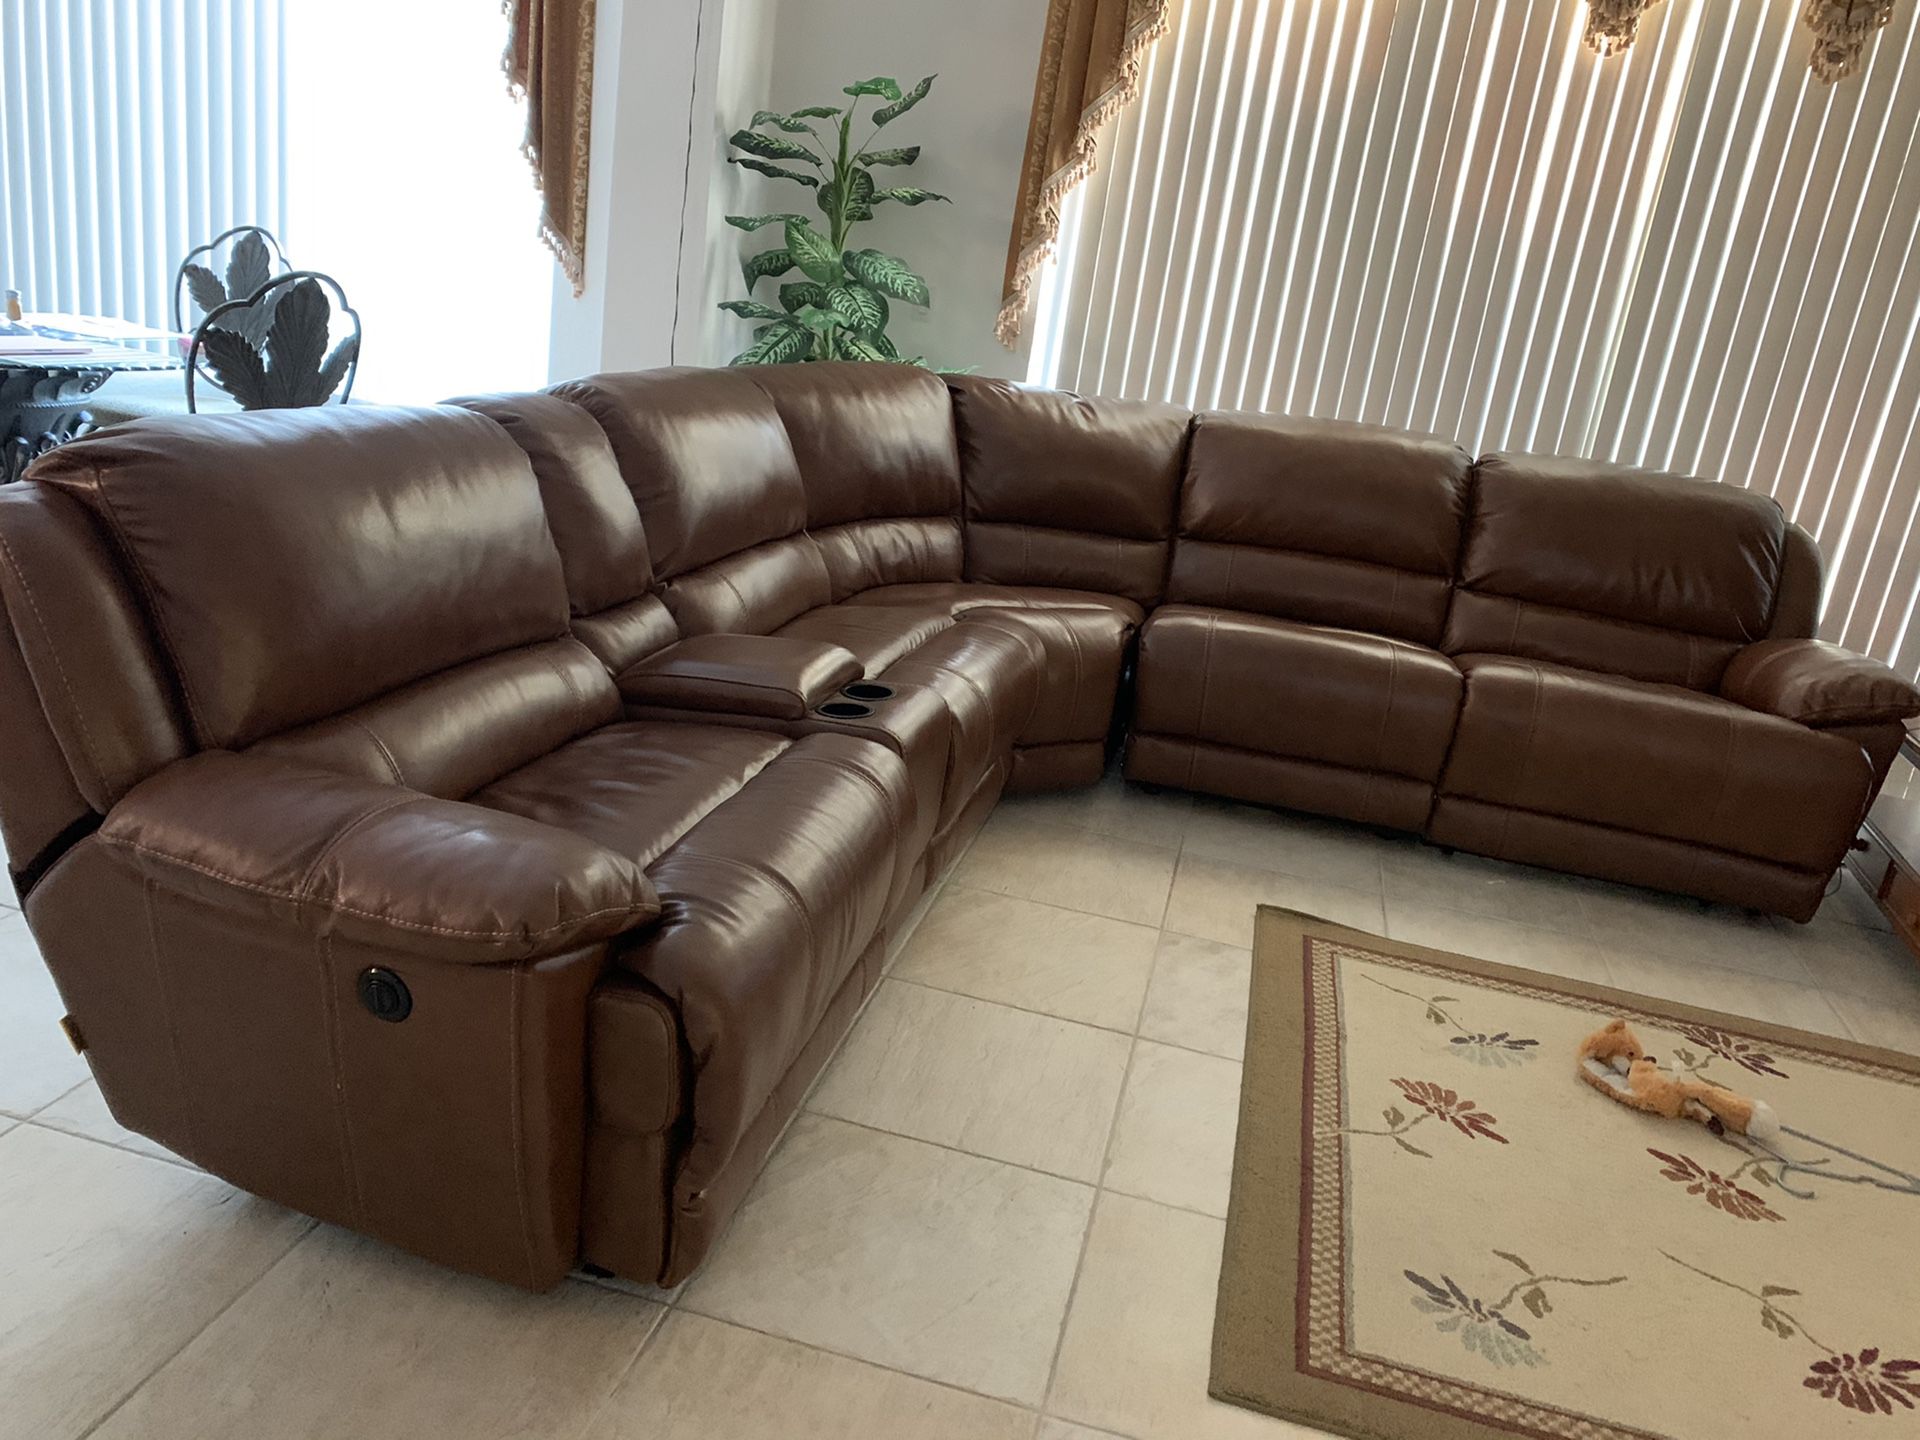 Let hLeather sectional couch ,just one time sat on it, like brand new